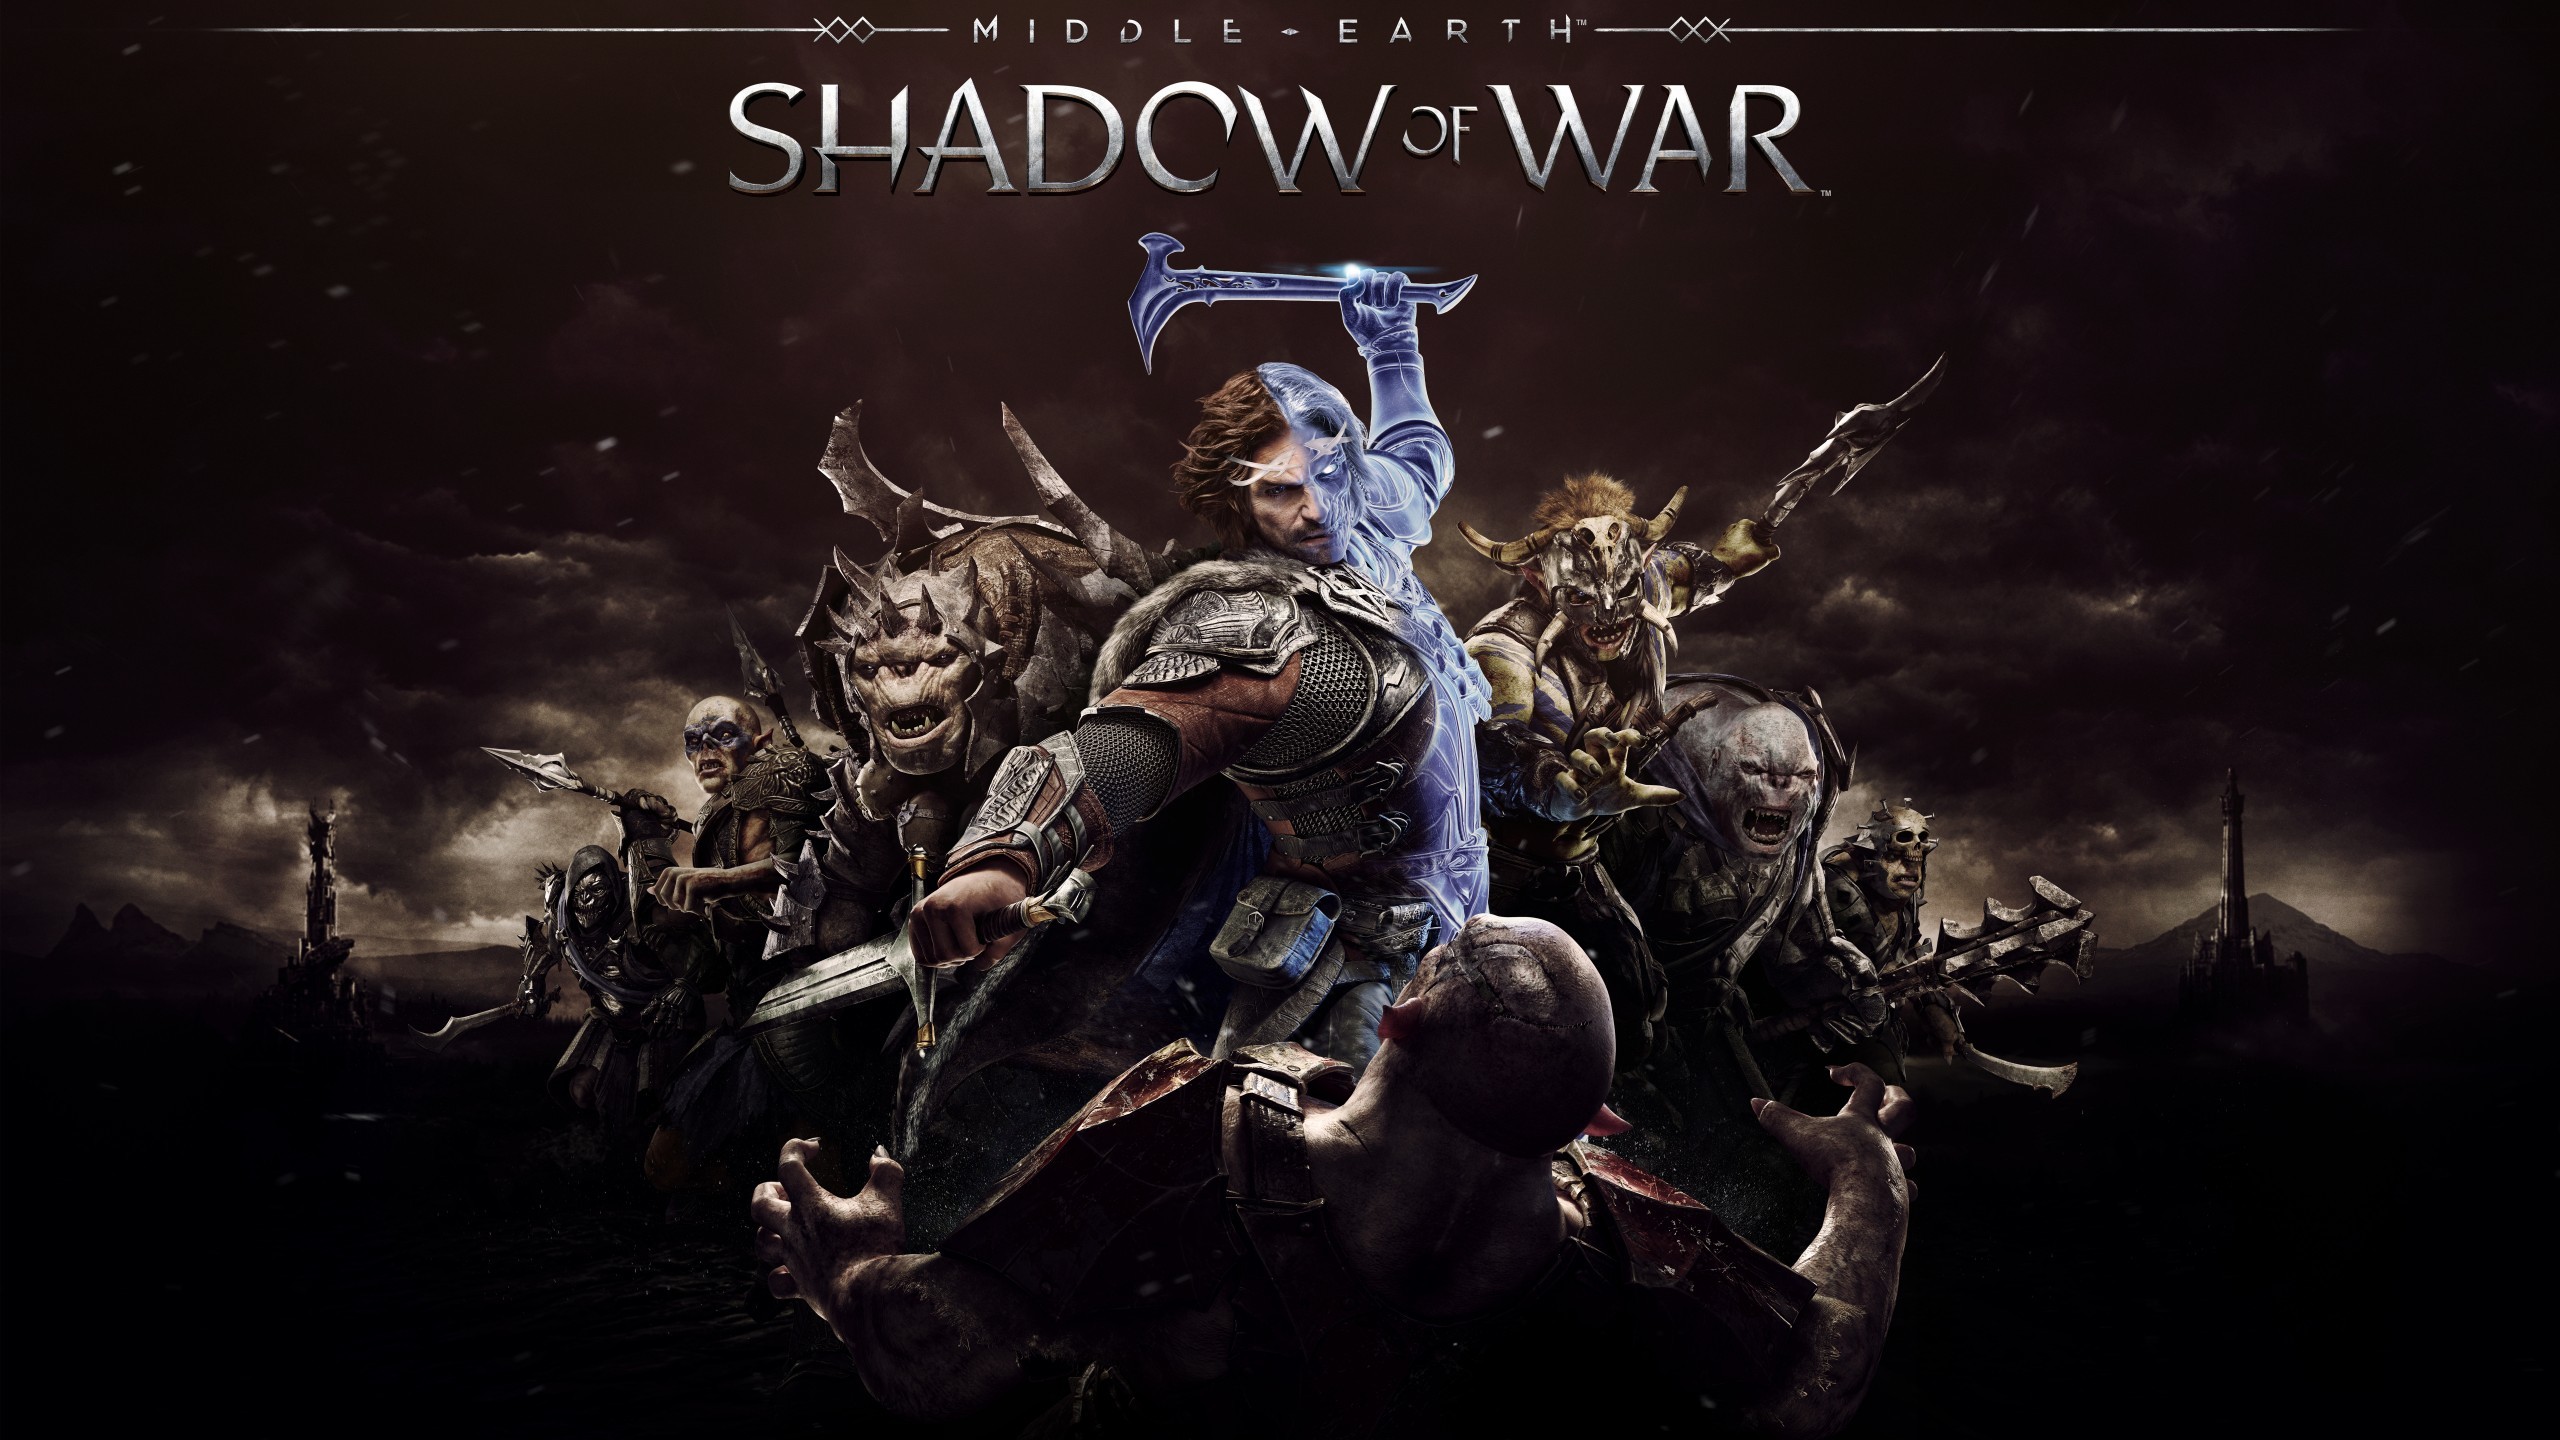 2560x1440 Games / Middle-earth: Shadow of War Wallpaper